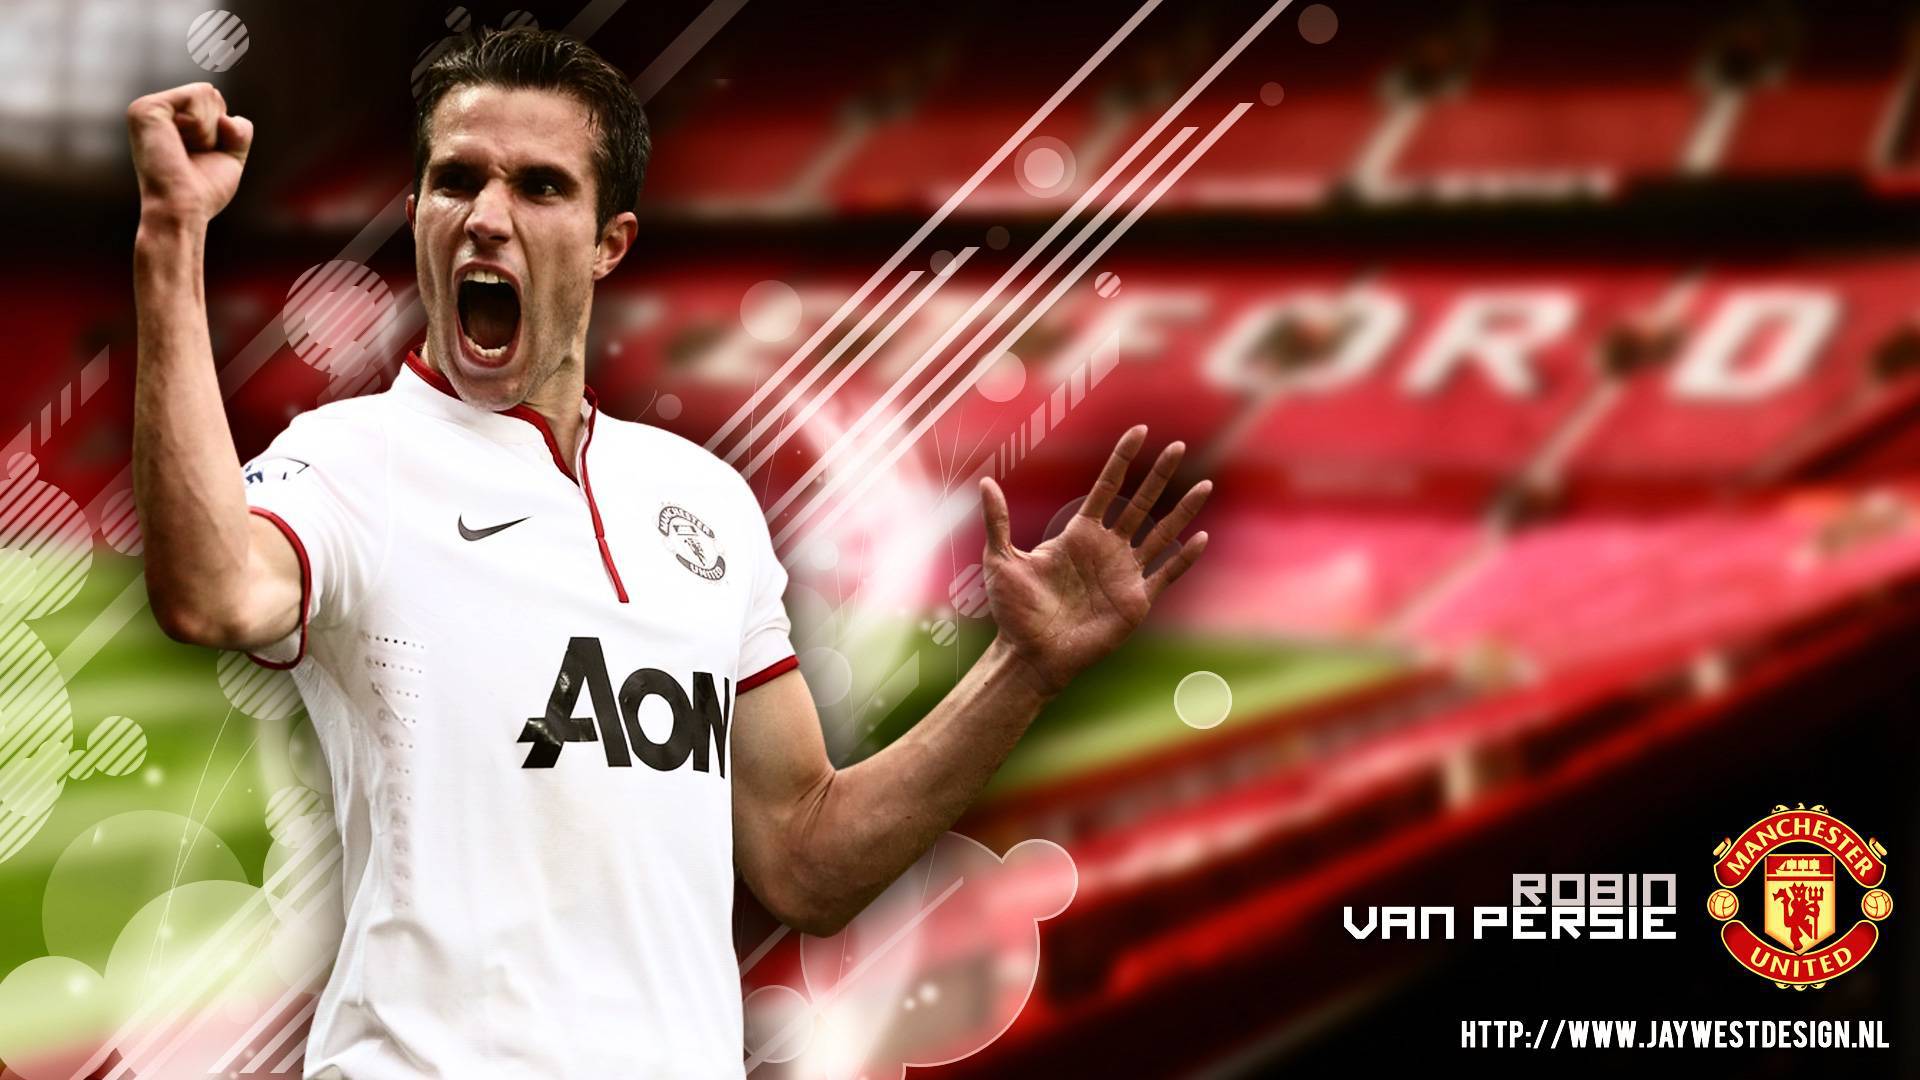 The player of Manchester United Robin van Persie scores wallpaper